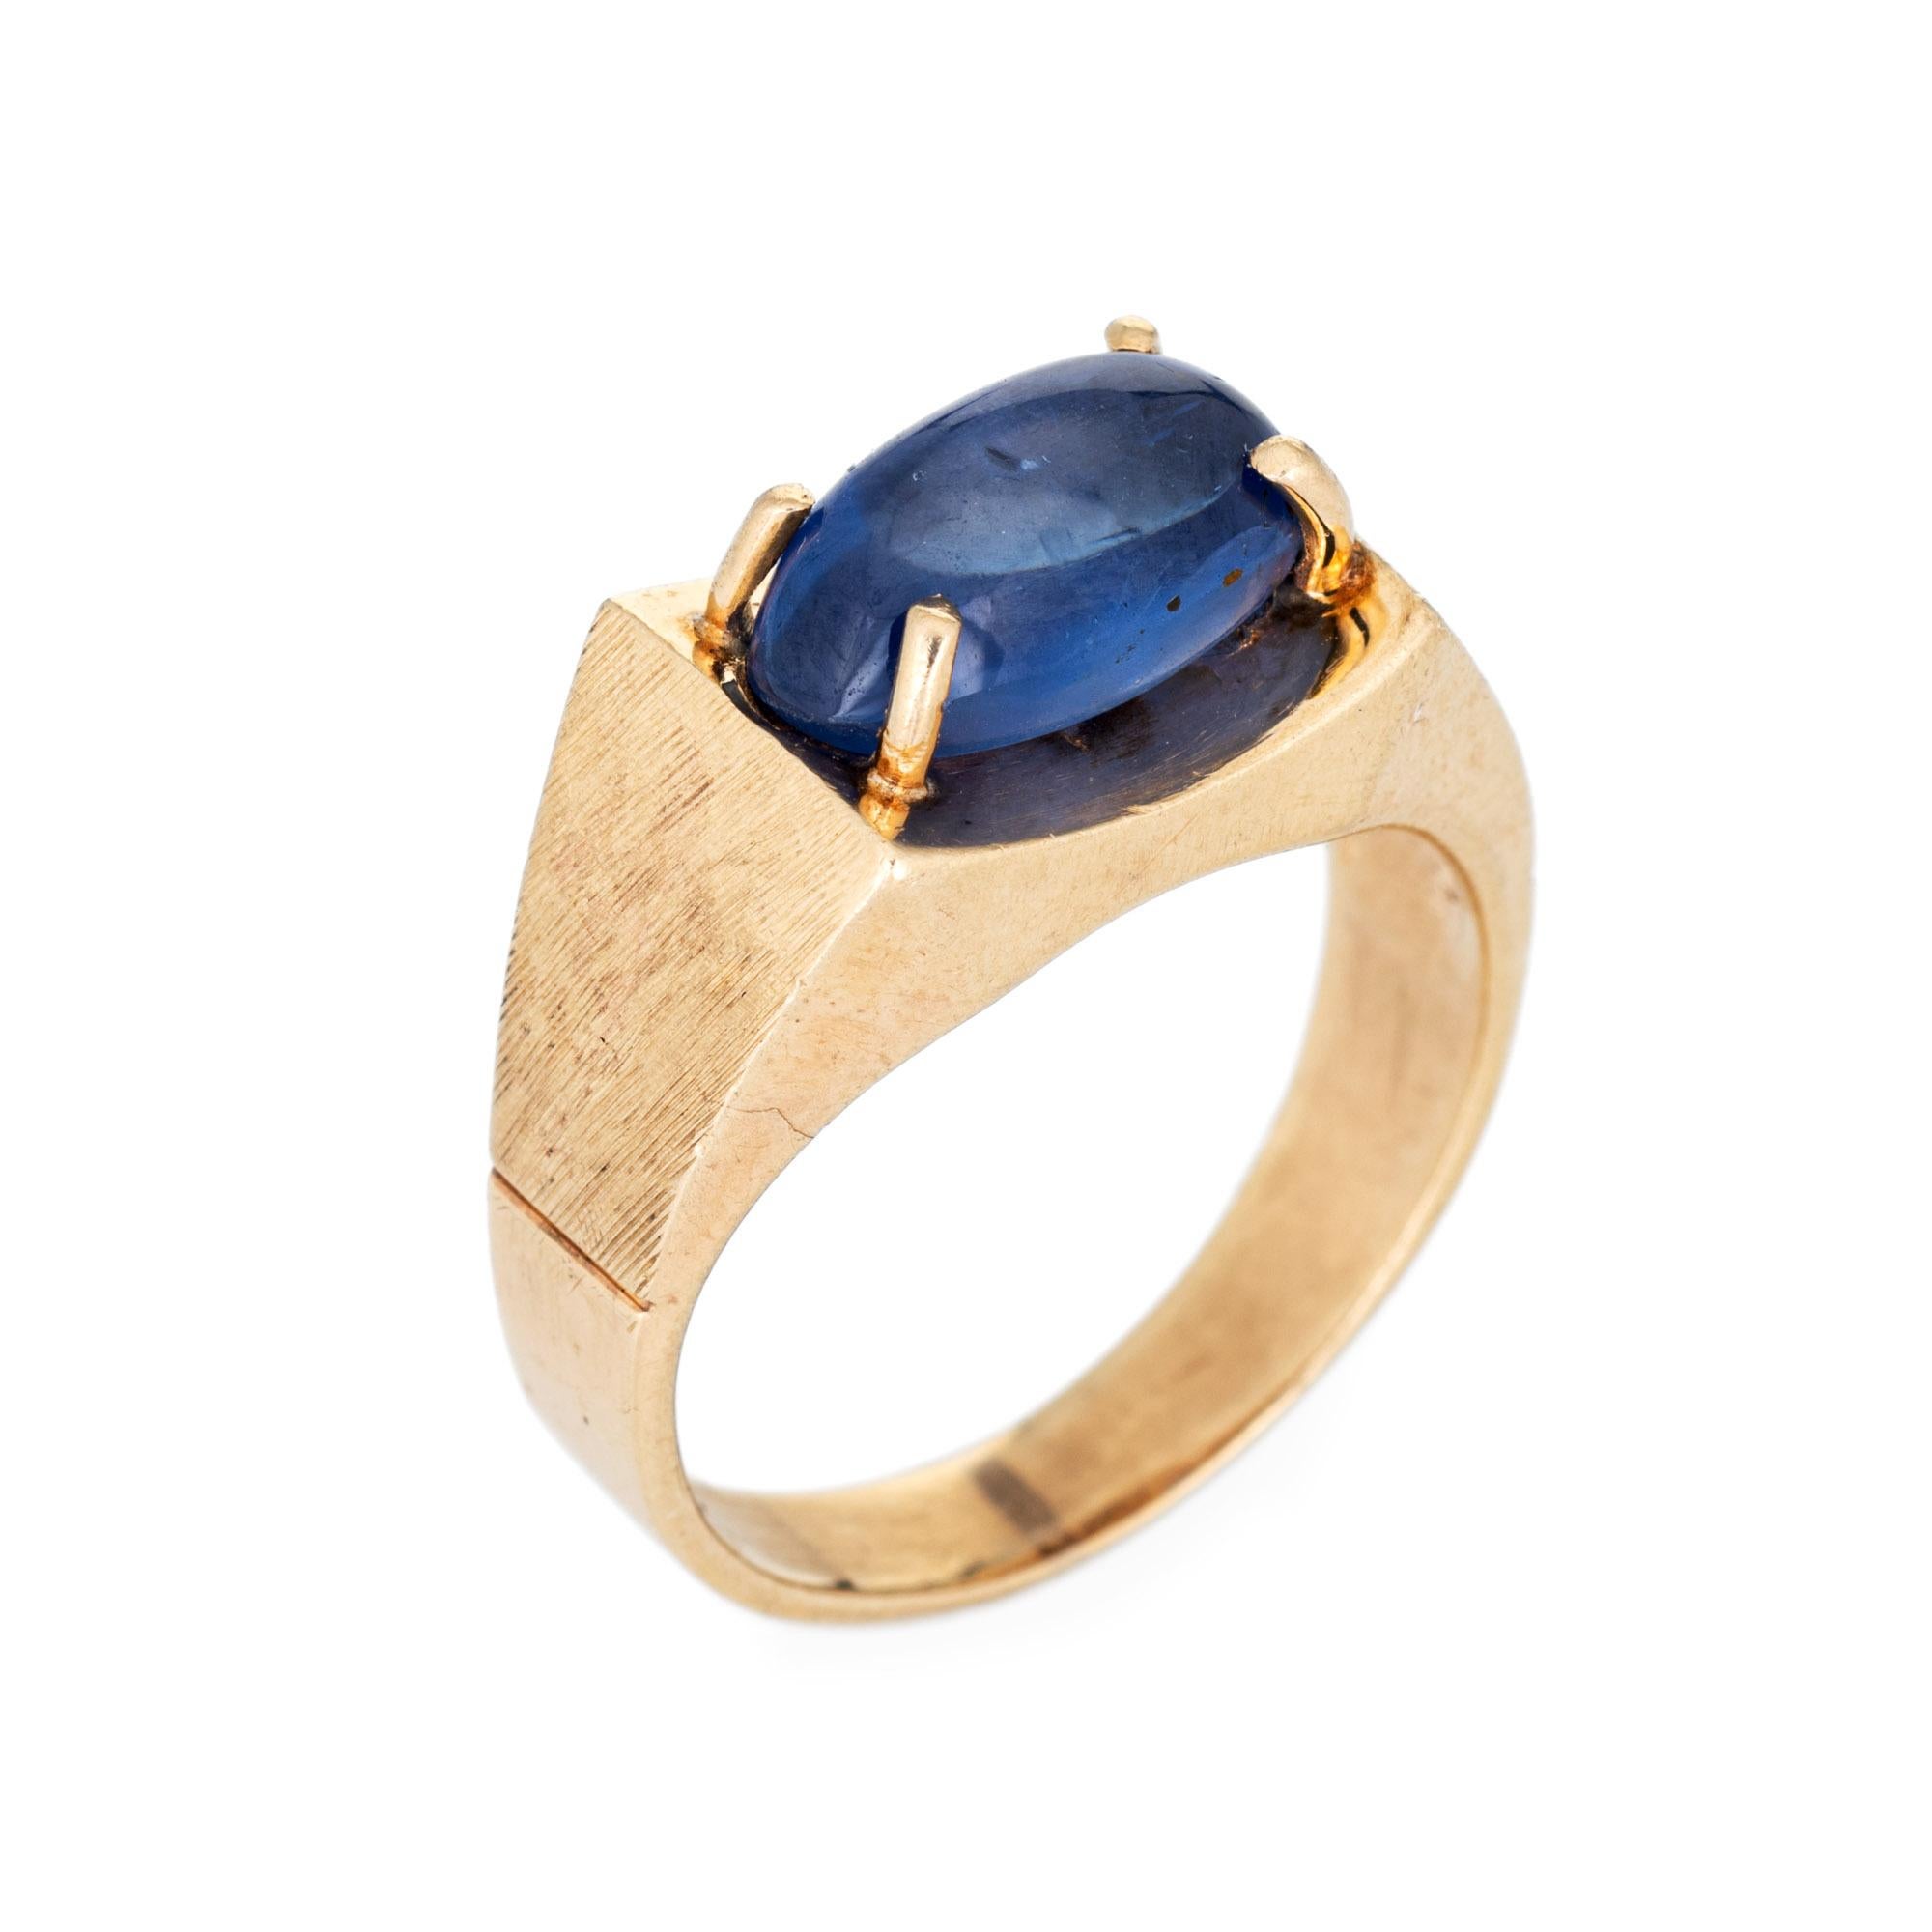 Stylish vintage natural Ceylon star sapphire ring crafted in 14 karat yellow gold (circa 1970s). 

Natural star sapphire, approx. 5.30ct (12.1 x 7.0 x 5.8mm), medium-dark blue color, lightly included, high polish. A faint star is visible under a